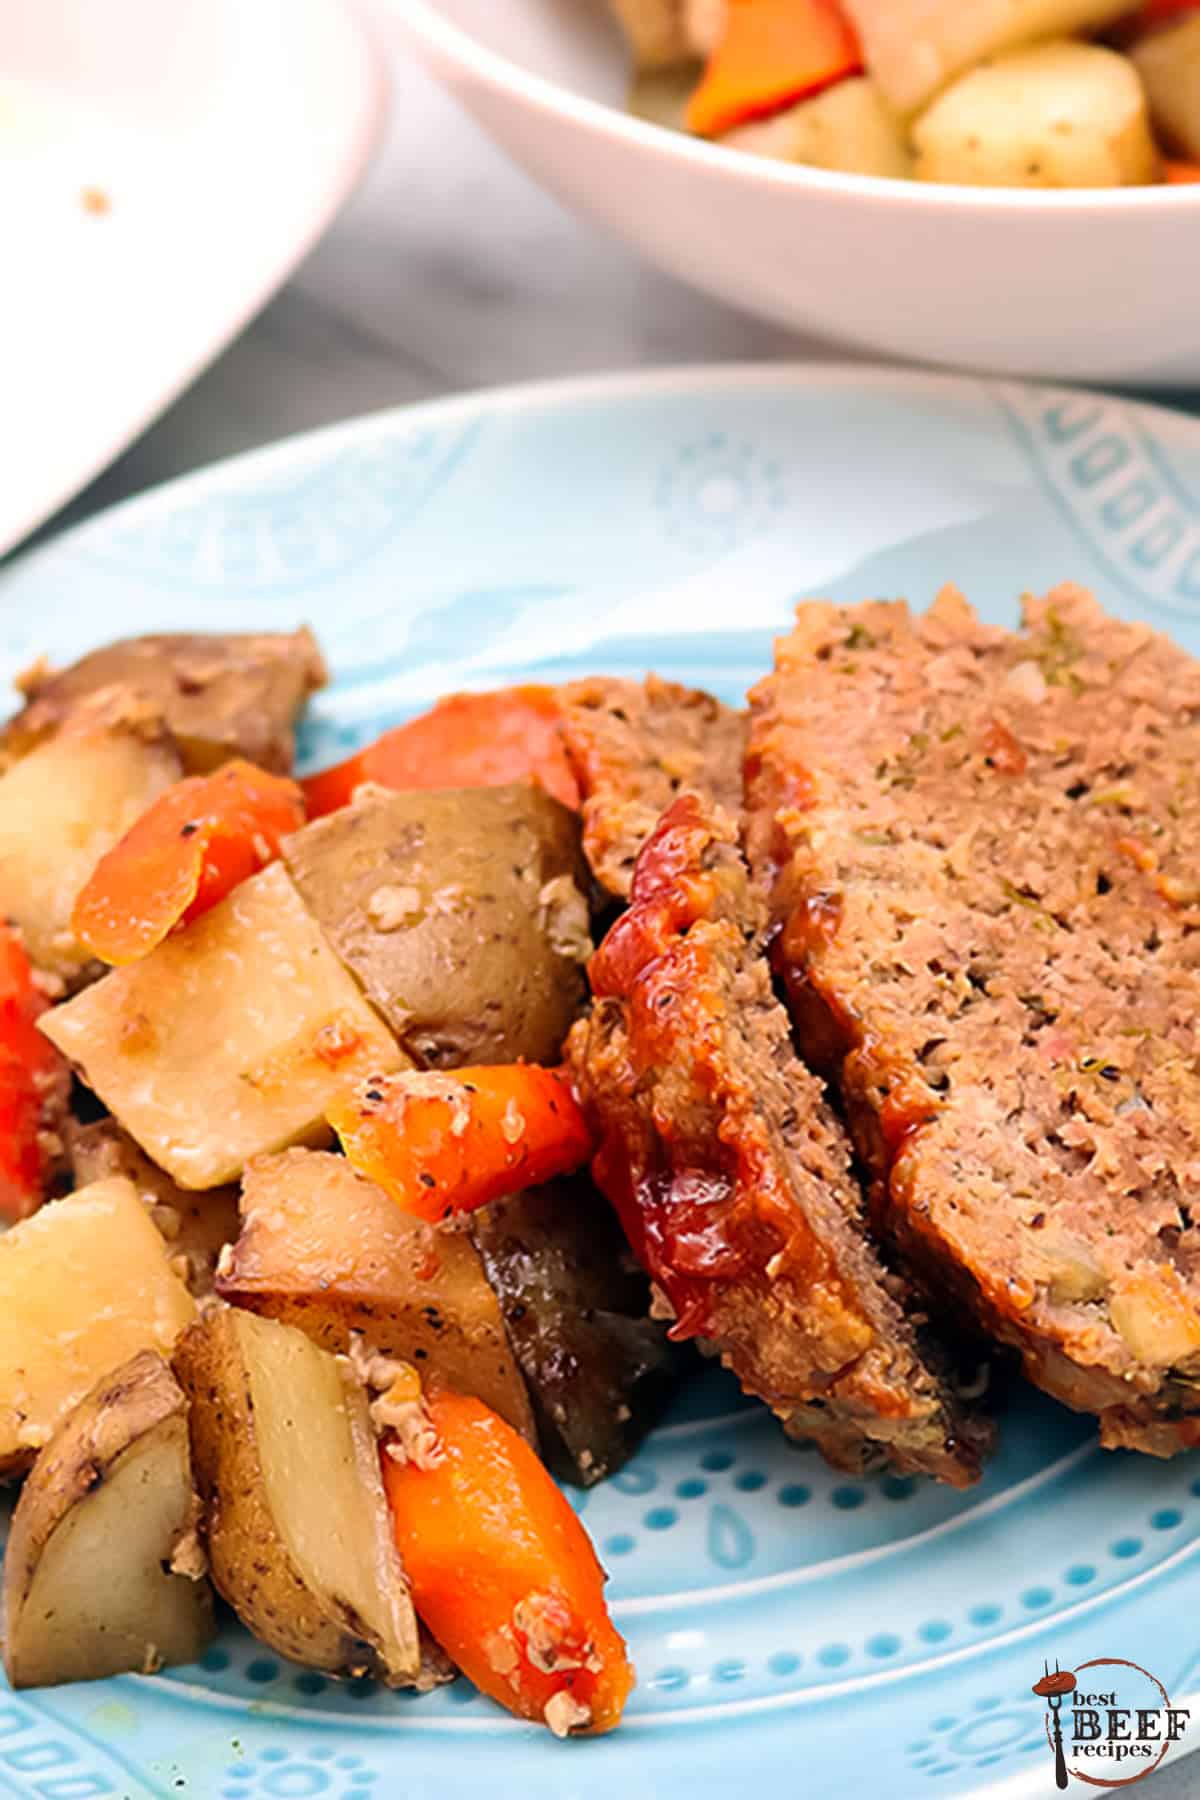 a plate filled with slices of slow cooker meatloaf, carrots, and potatoes